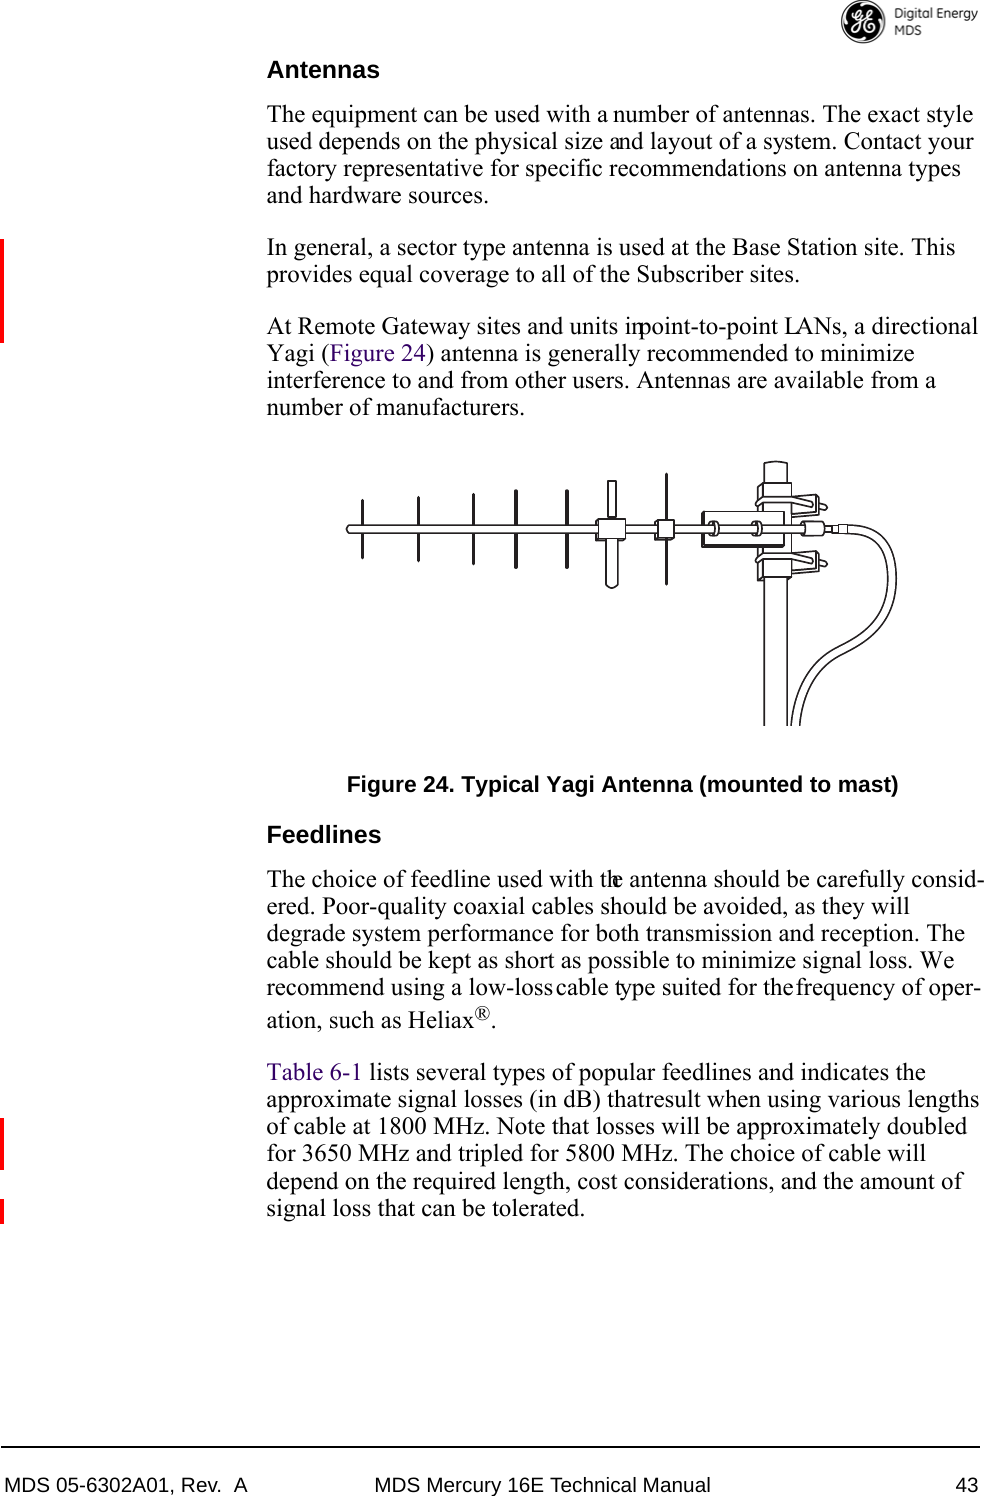 MDS 05-6302A01, Rev.  A MDS Mercury 16E Technical Manual 43AntennasThe equipment can be used with a number of antennas. The exact style used depends on the physical size and layout of a system. Contact your factory representative for specific recommendations on antenna types and hardware sources.In general, a sector type antenna is used at the Base Station site. This provides equal coverage to all of the Subscriber sites.At Remote Gateway sites and units in point-to-point LANs, a directional Yagi (Figure 24) antenna is generally recommended to minimize interference to and from other users. Antennas are available from a number of manufacturers.Invisible place holderFigure 24. Typical Yagi Antenna (mounted to mast)FeedlinesThe choice of feedline used with the antenna should be carefully consid-ered. Poor-quality coaxial cables should be avoided, as they will degrade system performance for both transmission and reception. The cable should be kept as short as possible to minimize signal loss. We recommend using a low-loss cable type suited for the frequency of oper-ation, such as Heliax®.Table 6-1 lists several types of popular feedlines and indicates the approximate signal losses (in dB) that result when using various lengths of cable at 1800 MHz. Note that losses will be approximately doubled for 3650 MHz and tripled for 5800 MHz. The choice of cable will depend on the required length, cost considerations, and the amount of signal loss that can be tolerated.